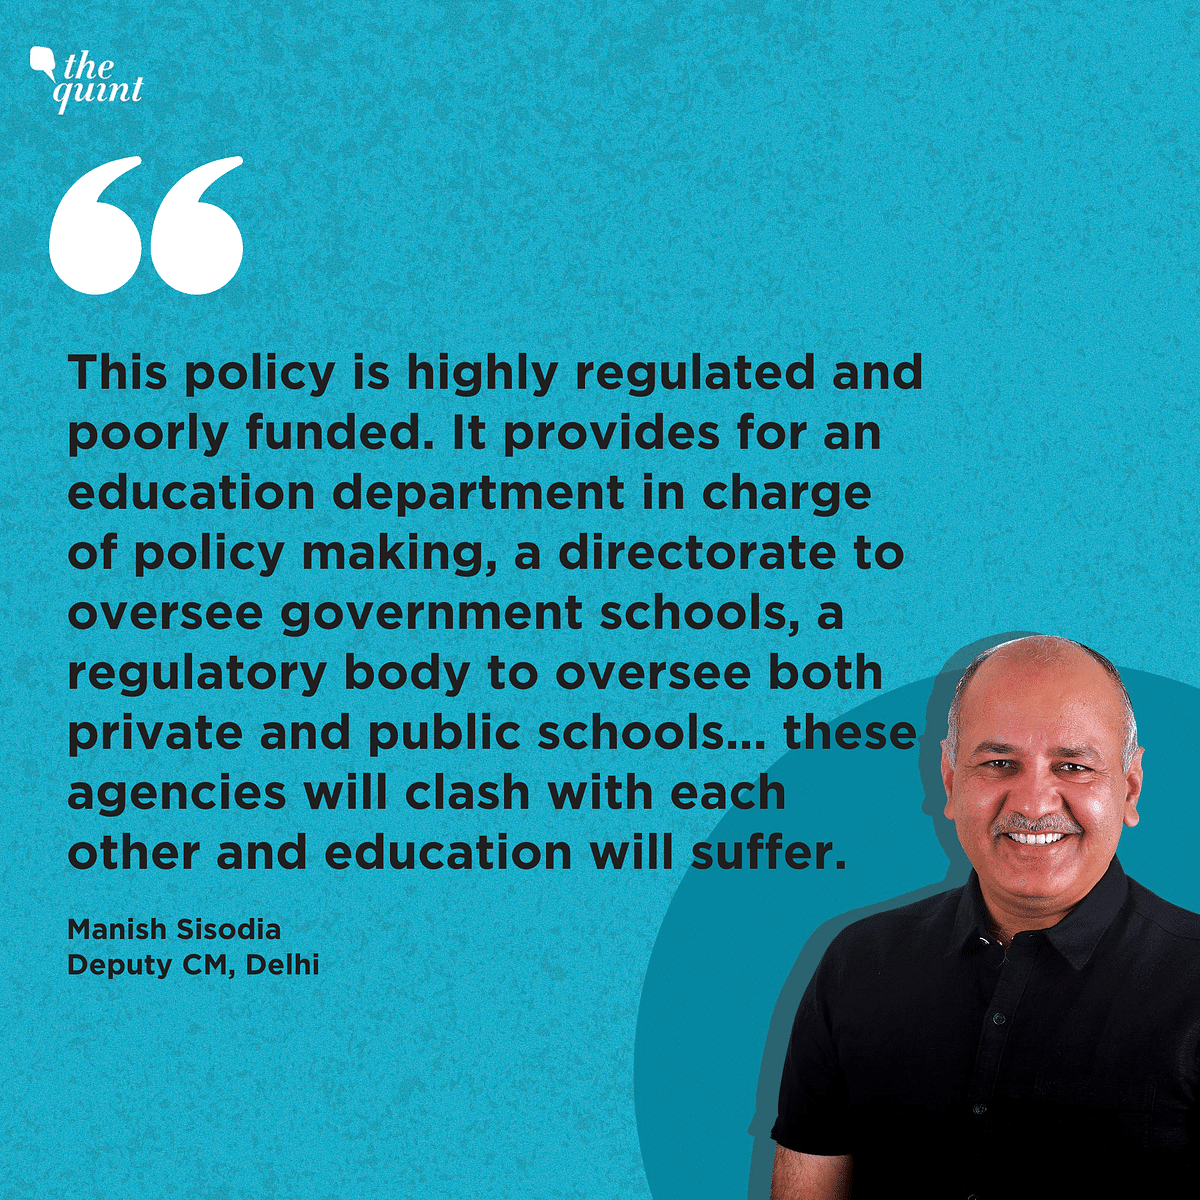 Sisodia said that while the NEP 2020 addresses India’s education gaps, it is silent on how they would be reformed.